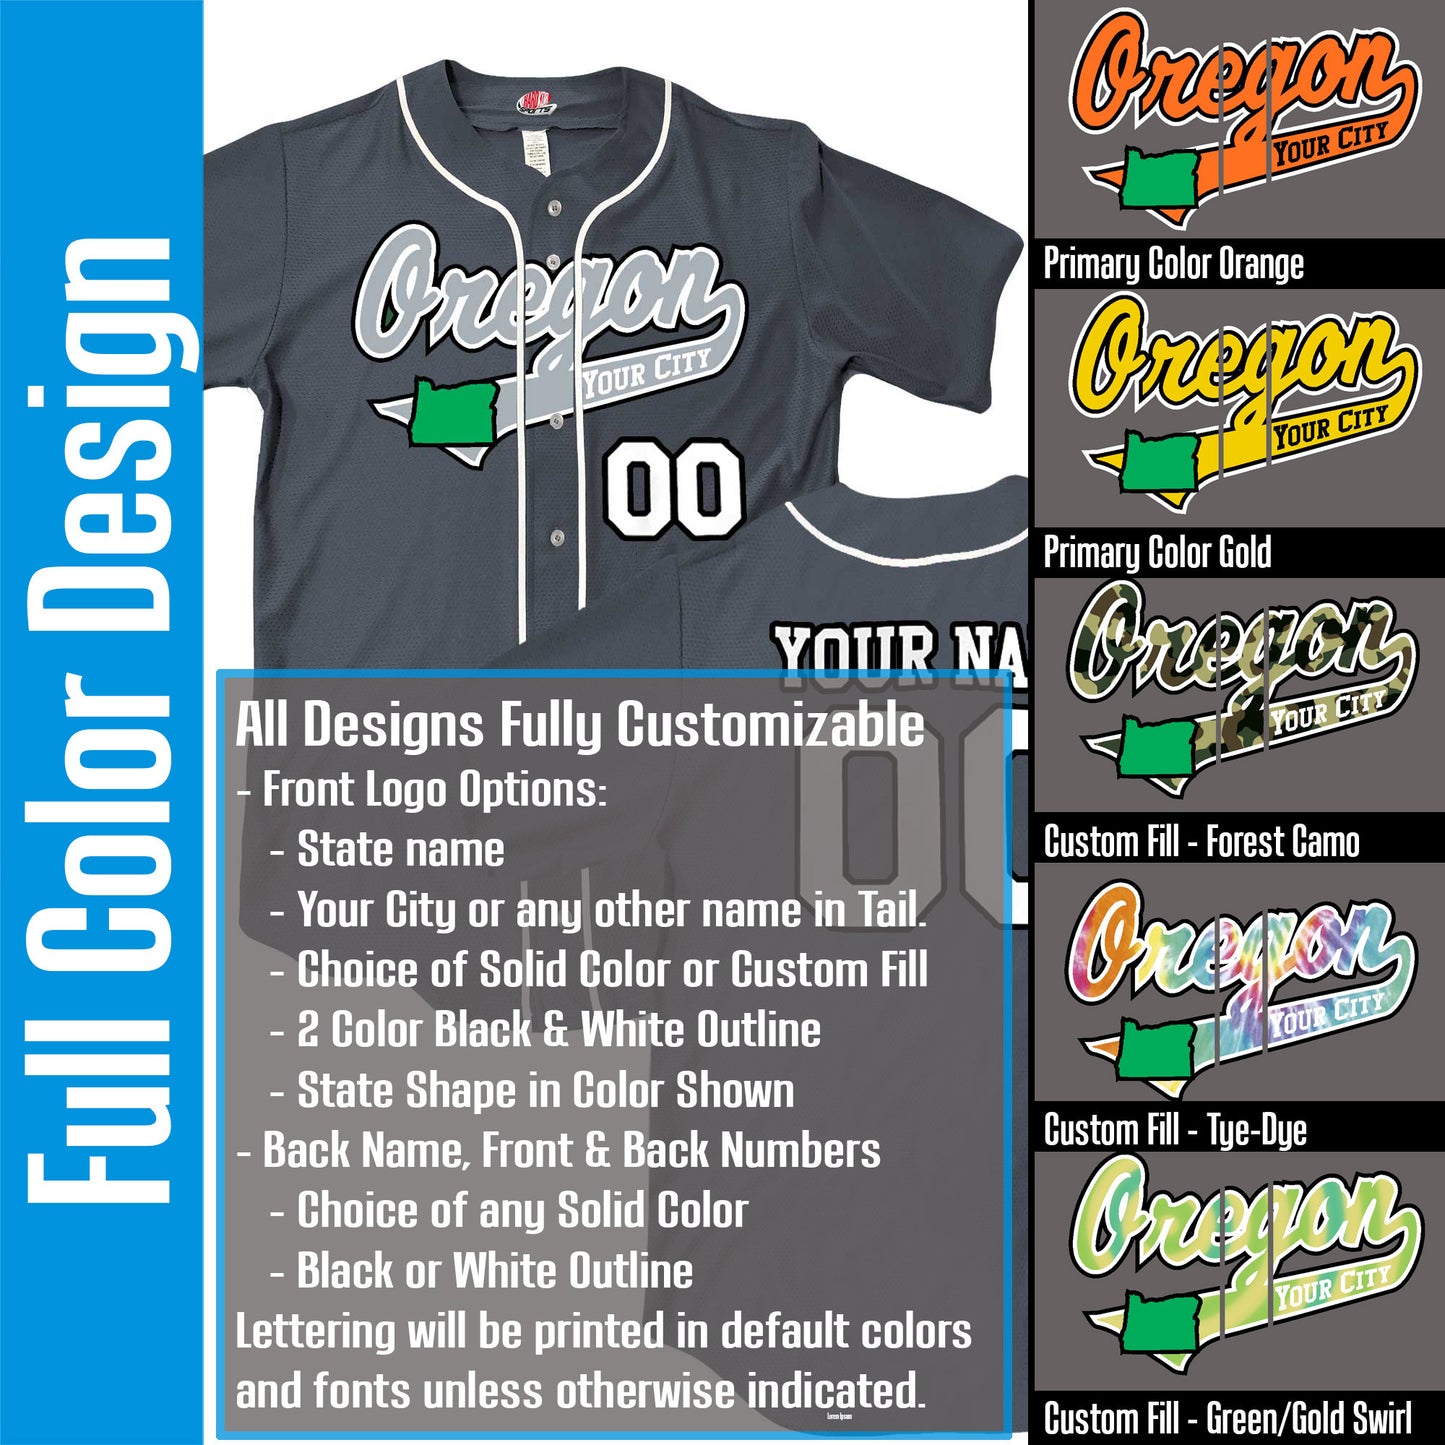 Custom Oregon Baseball Jersey, Dark Green or Graphite Grey, Personalized with Your City, Your Name and Numbers, Choice of Print Options